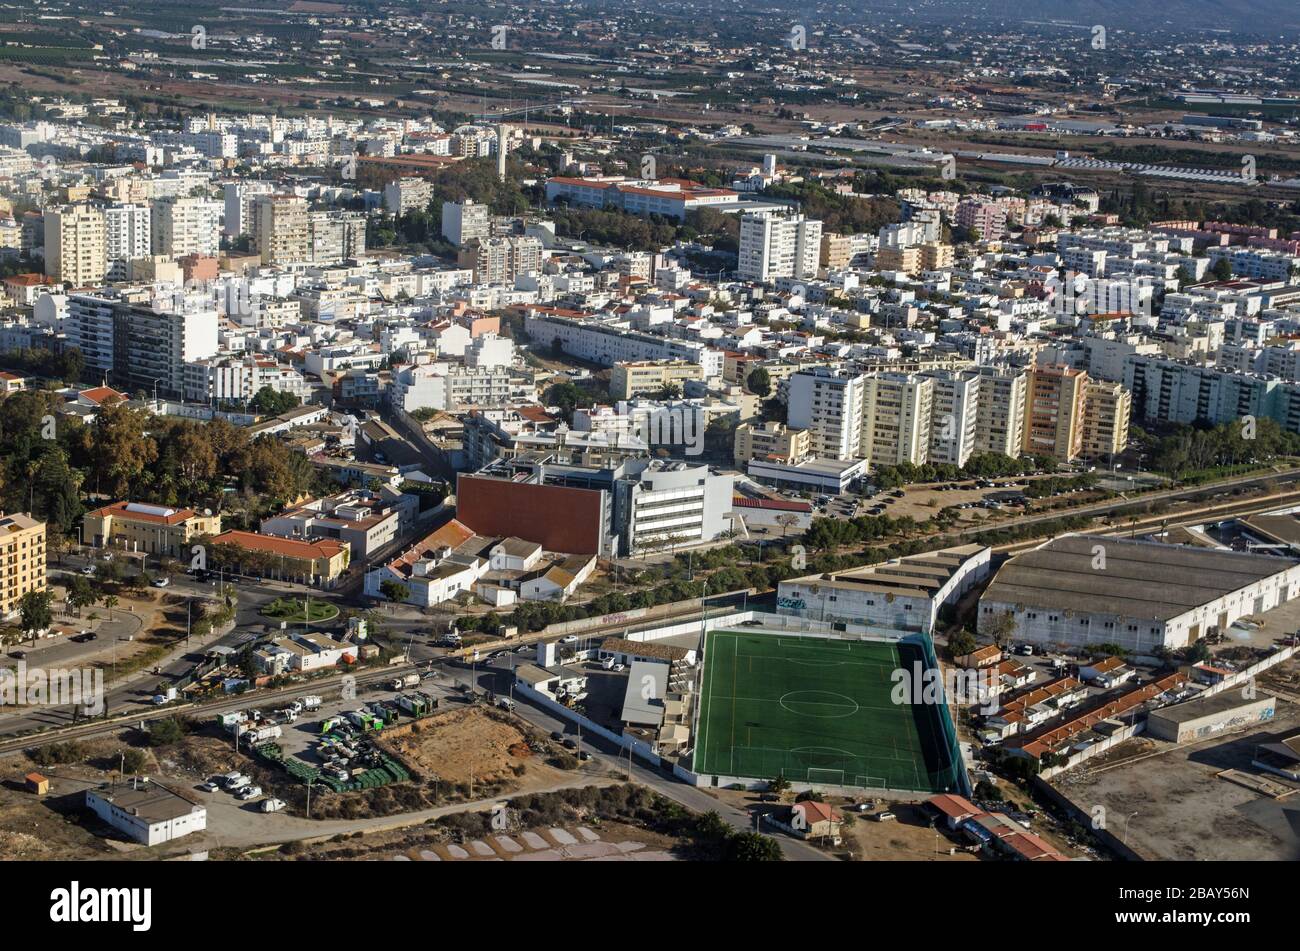 Aerial view of Faro on the Algarve Coast of Portugal with the Escola de Futebol, football school to the foreground. Stock Photo